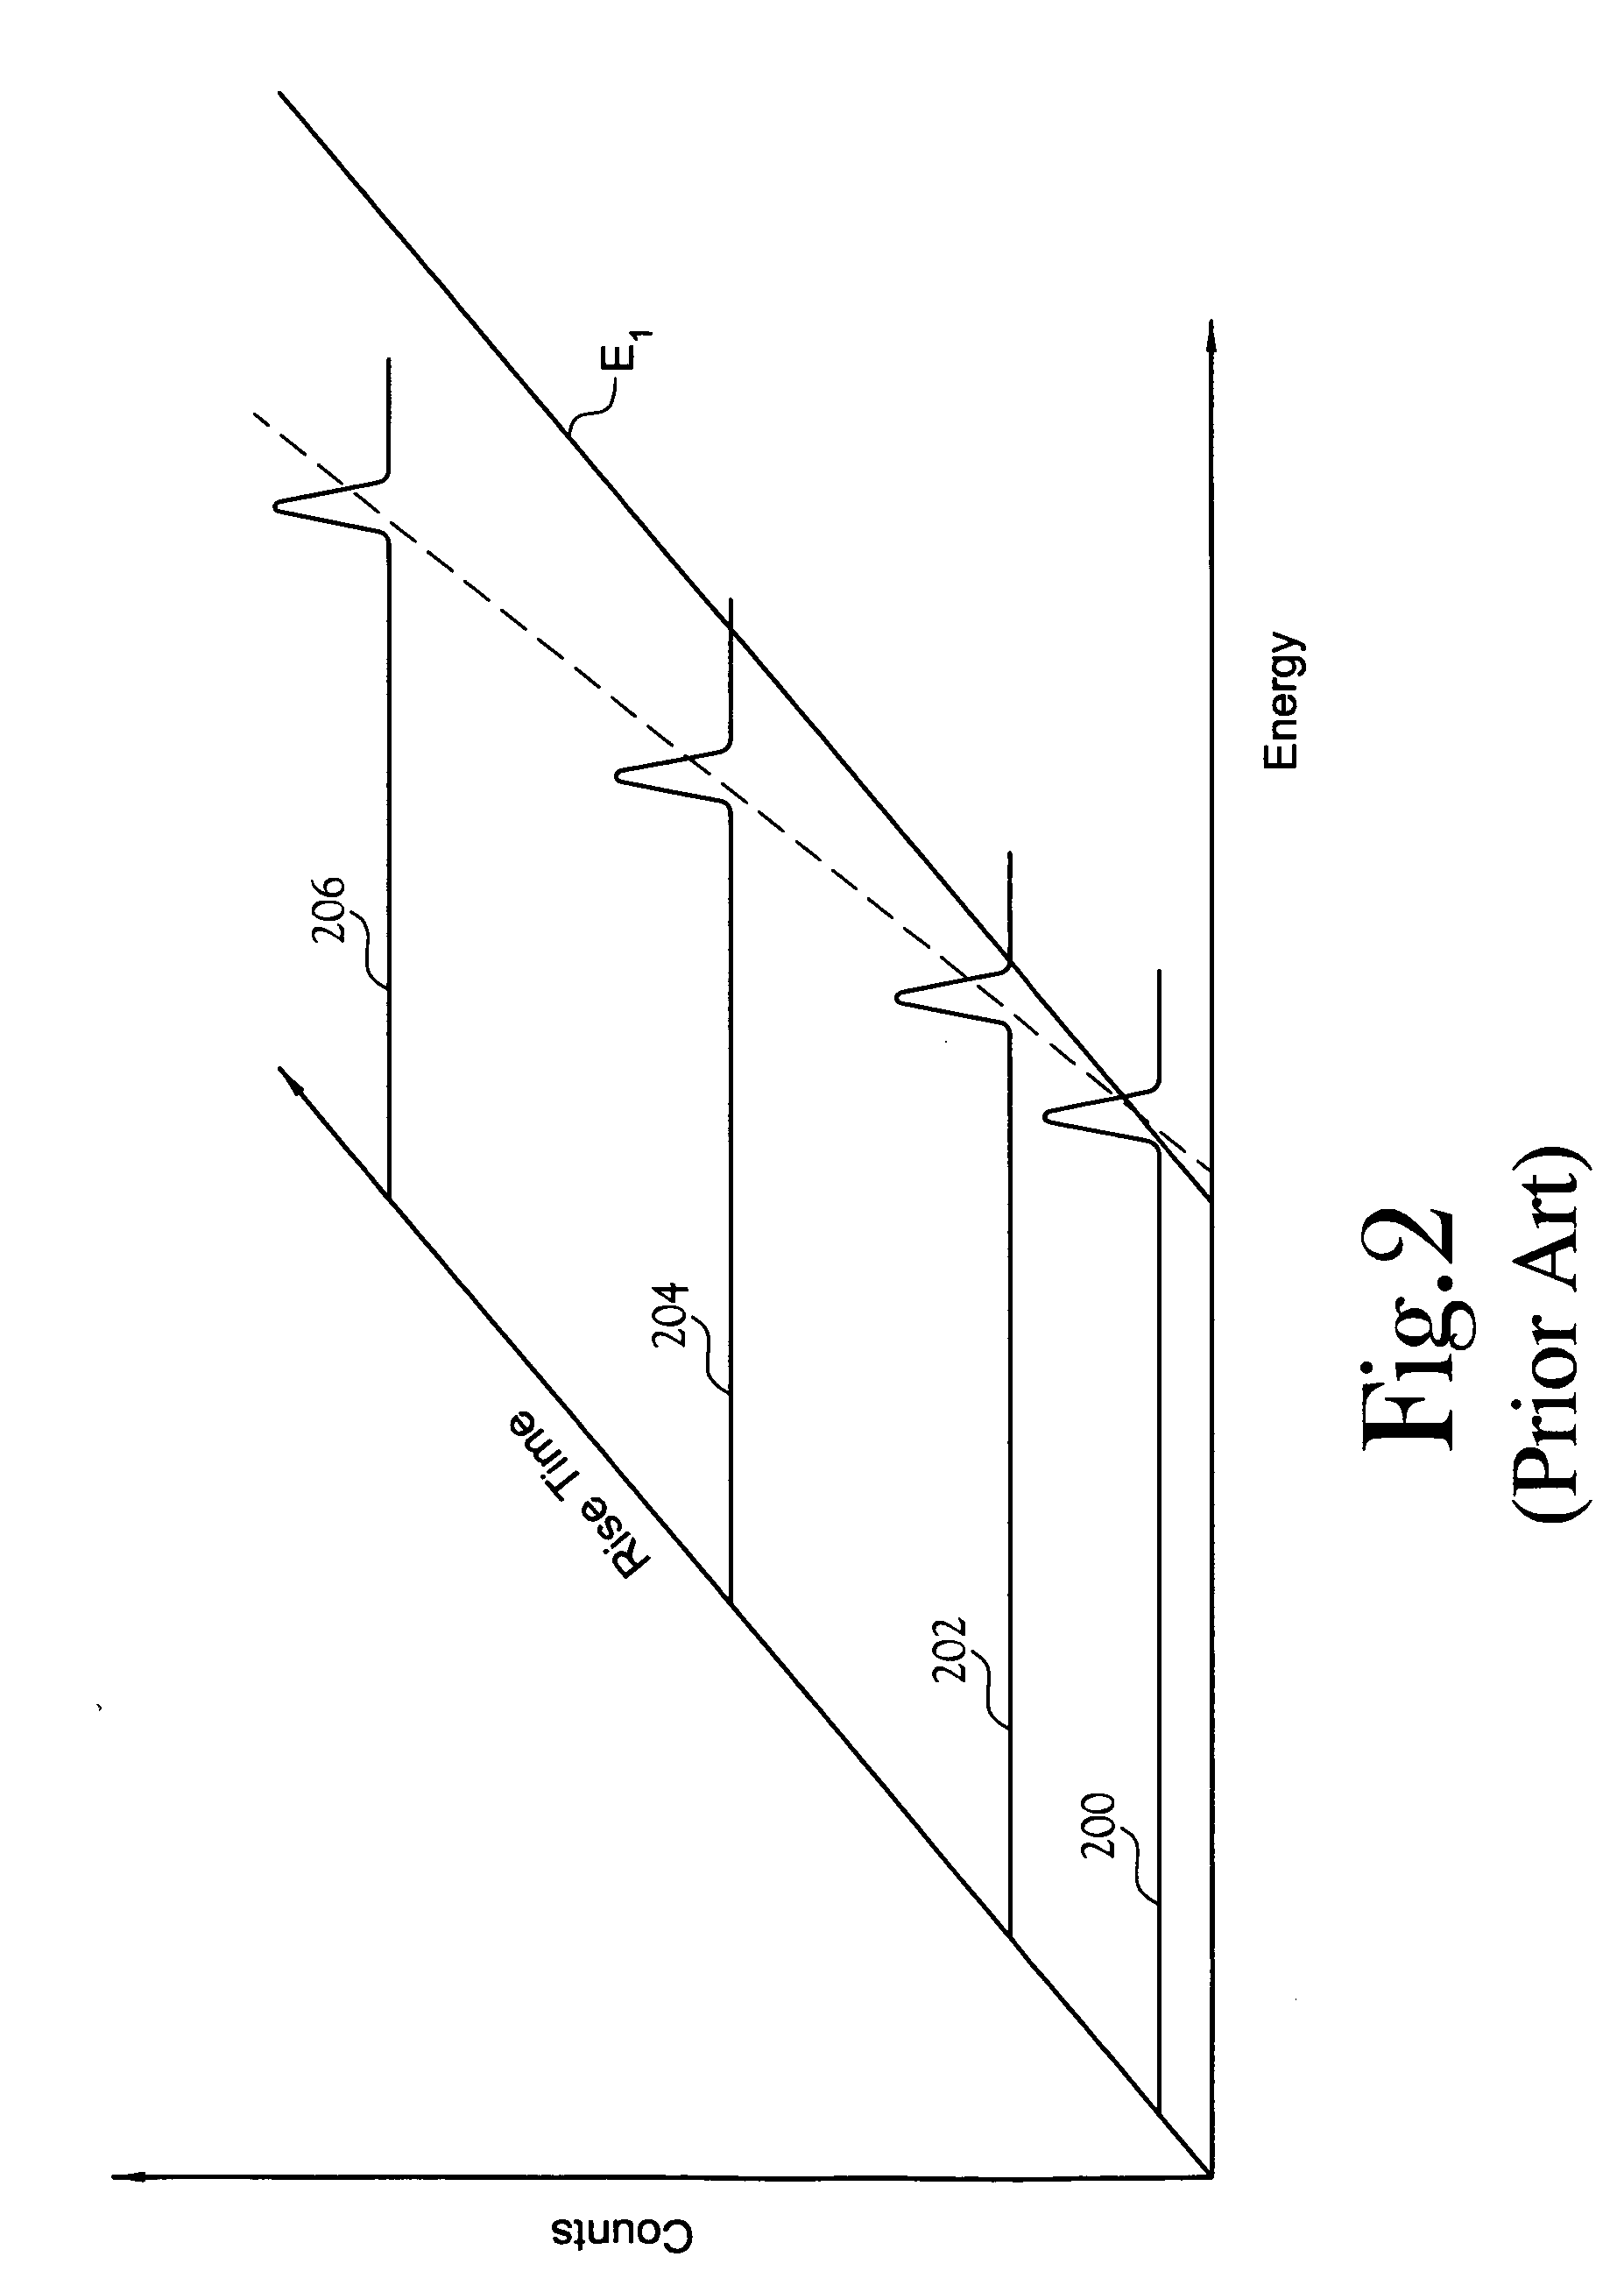 Spectrometer with charge-carrier-trapping correction